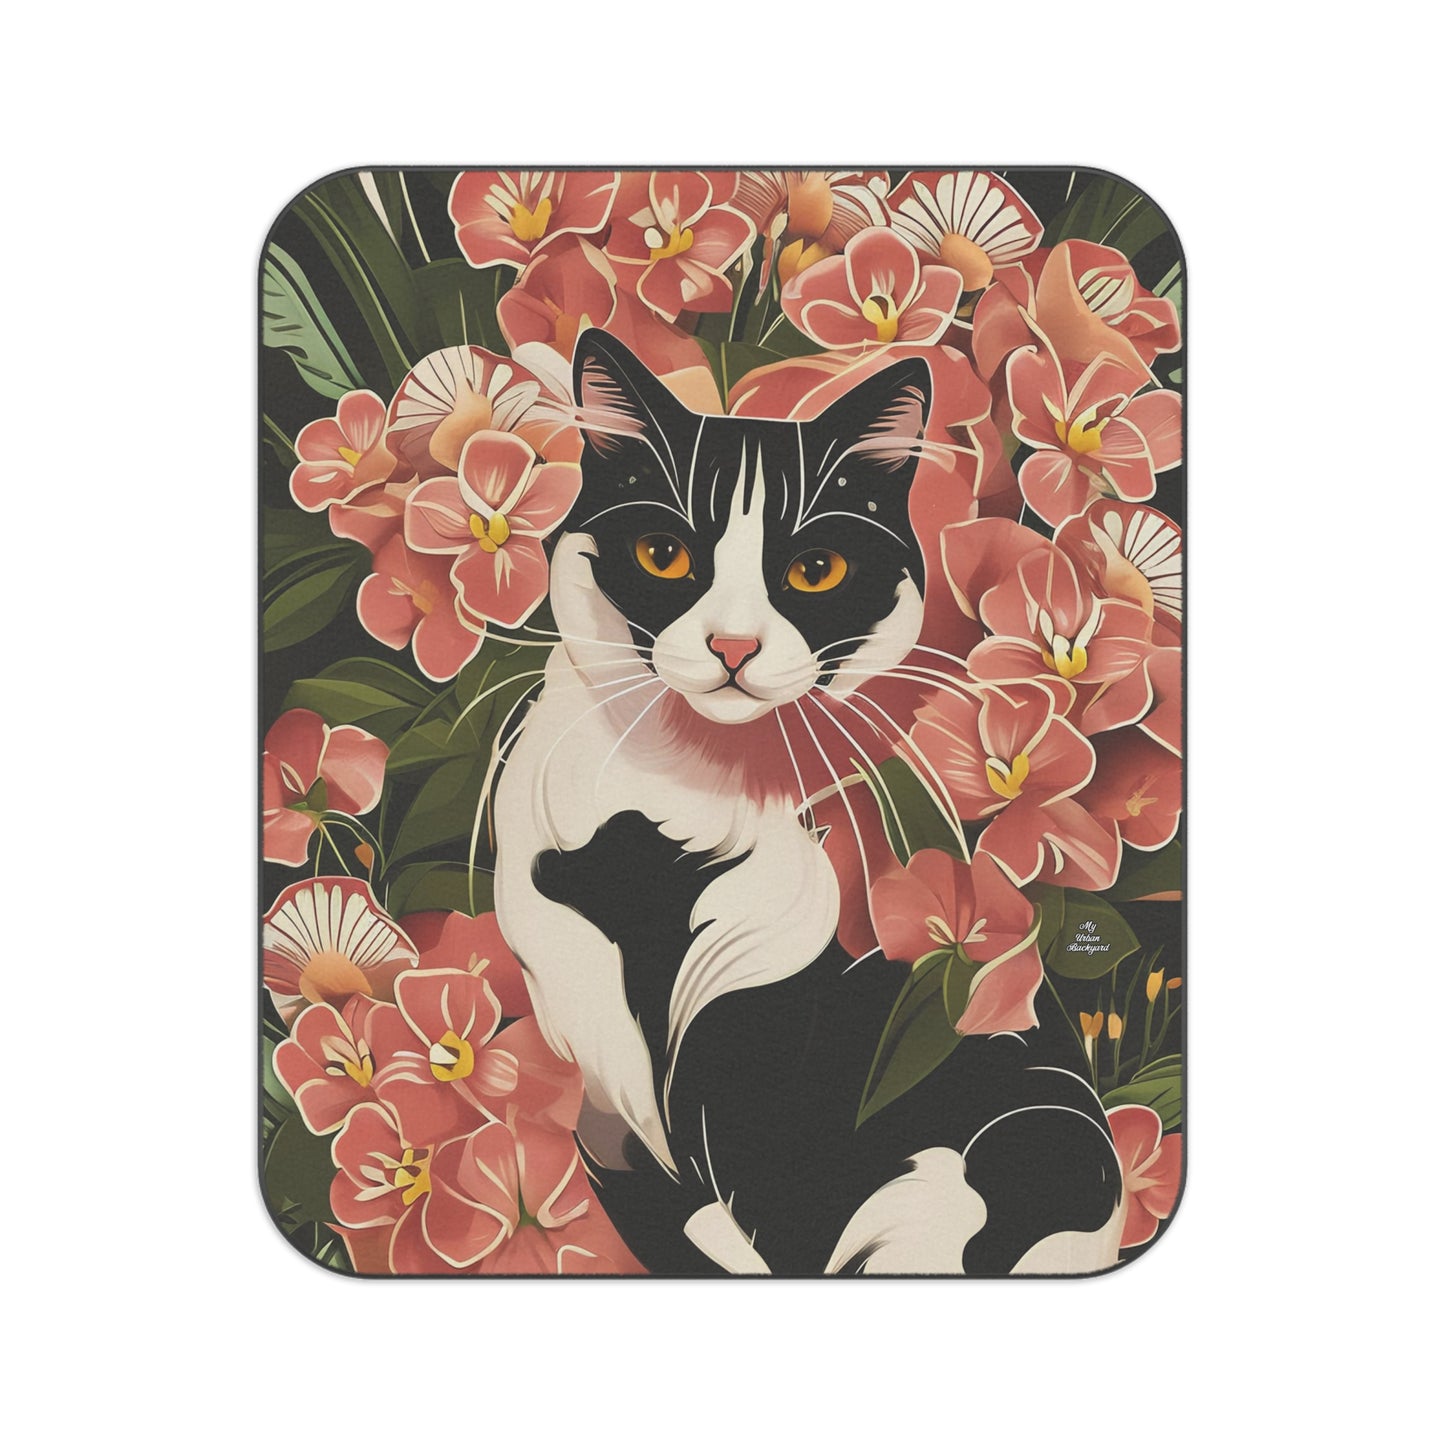 Outdoor Picnic Blanket with Soft Fleece Top and Water-Resistant Bottom - Black & White Cat in Flowers